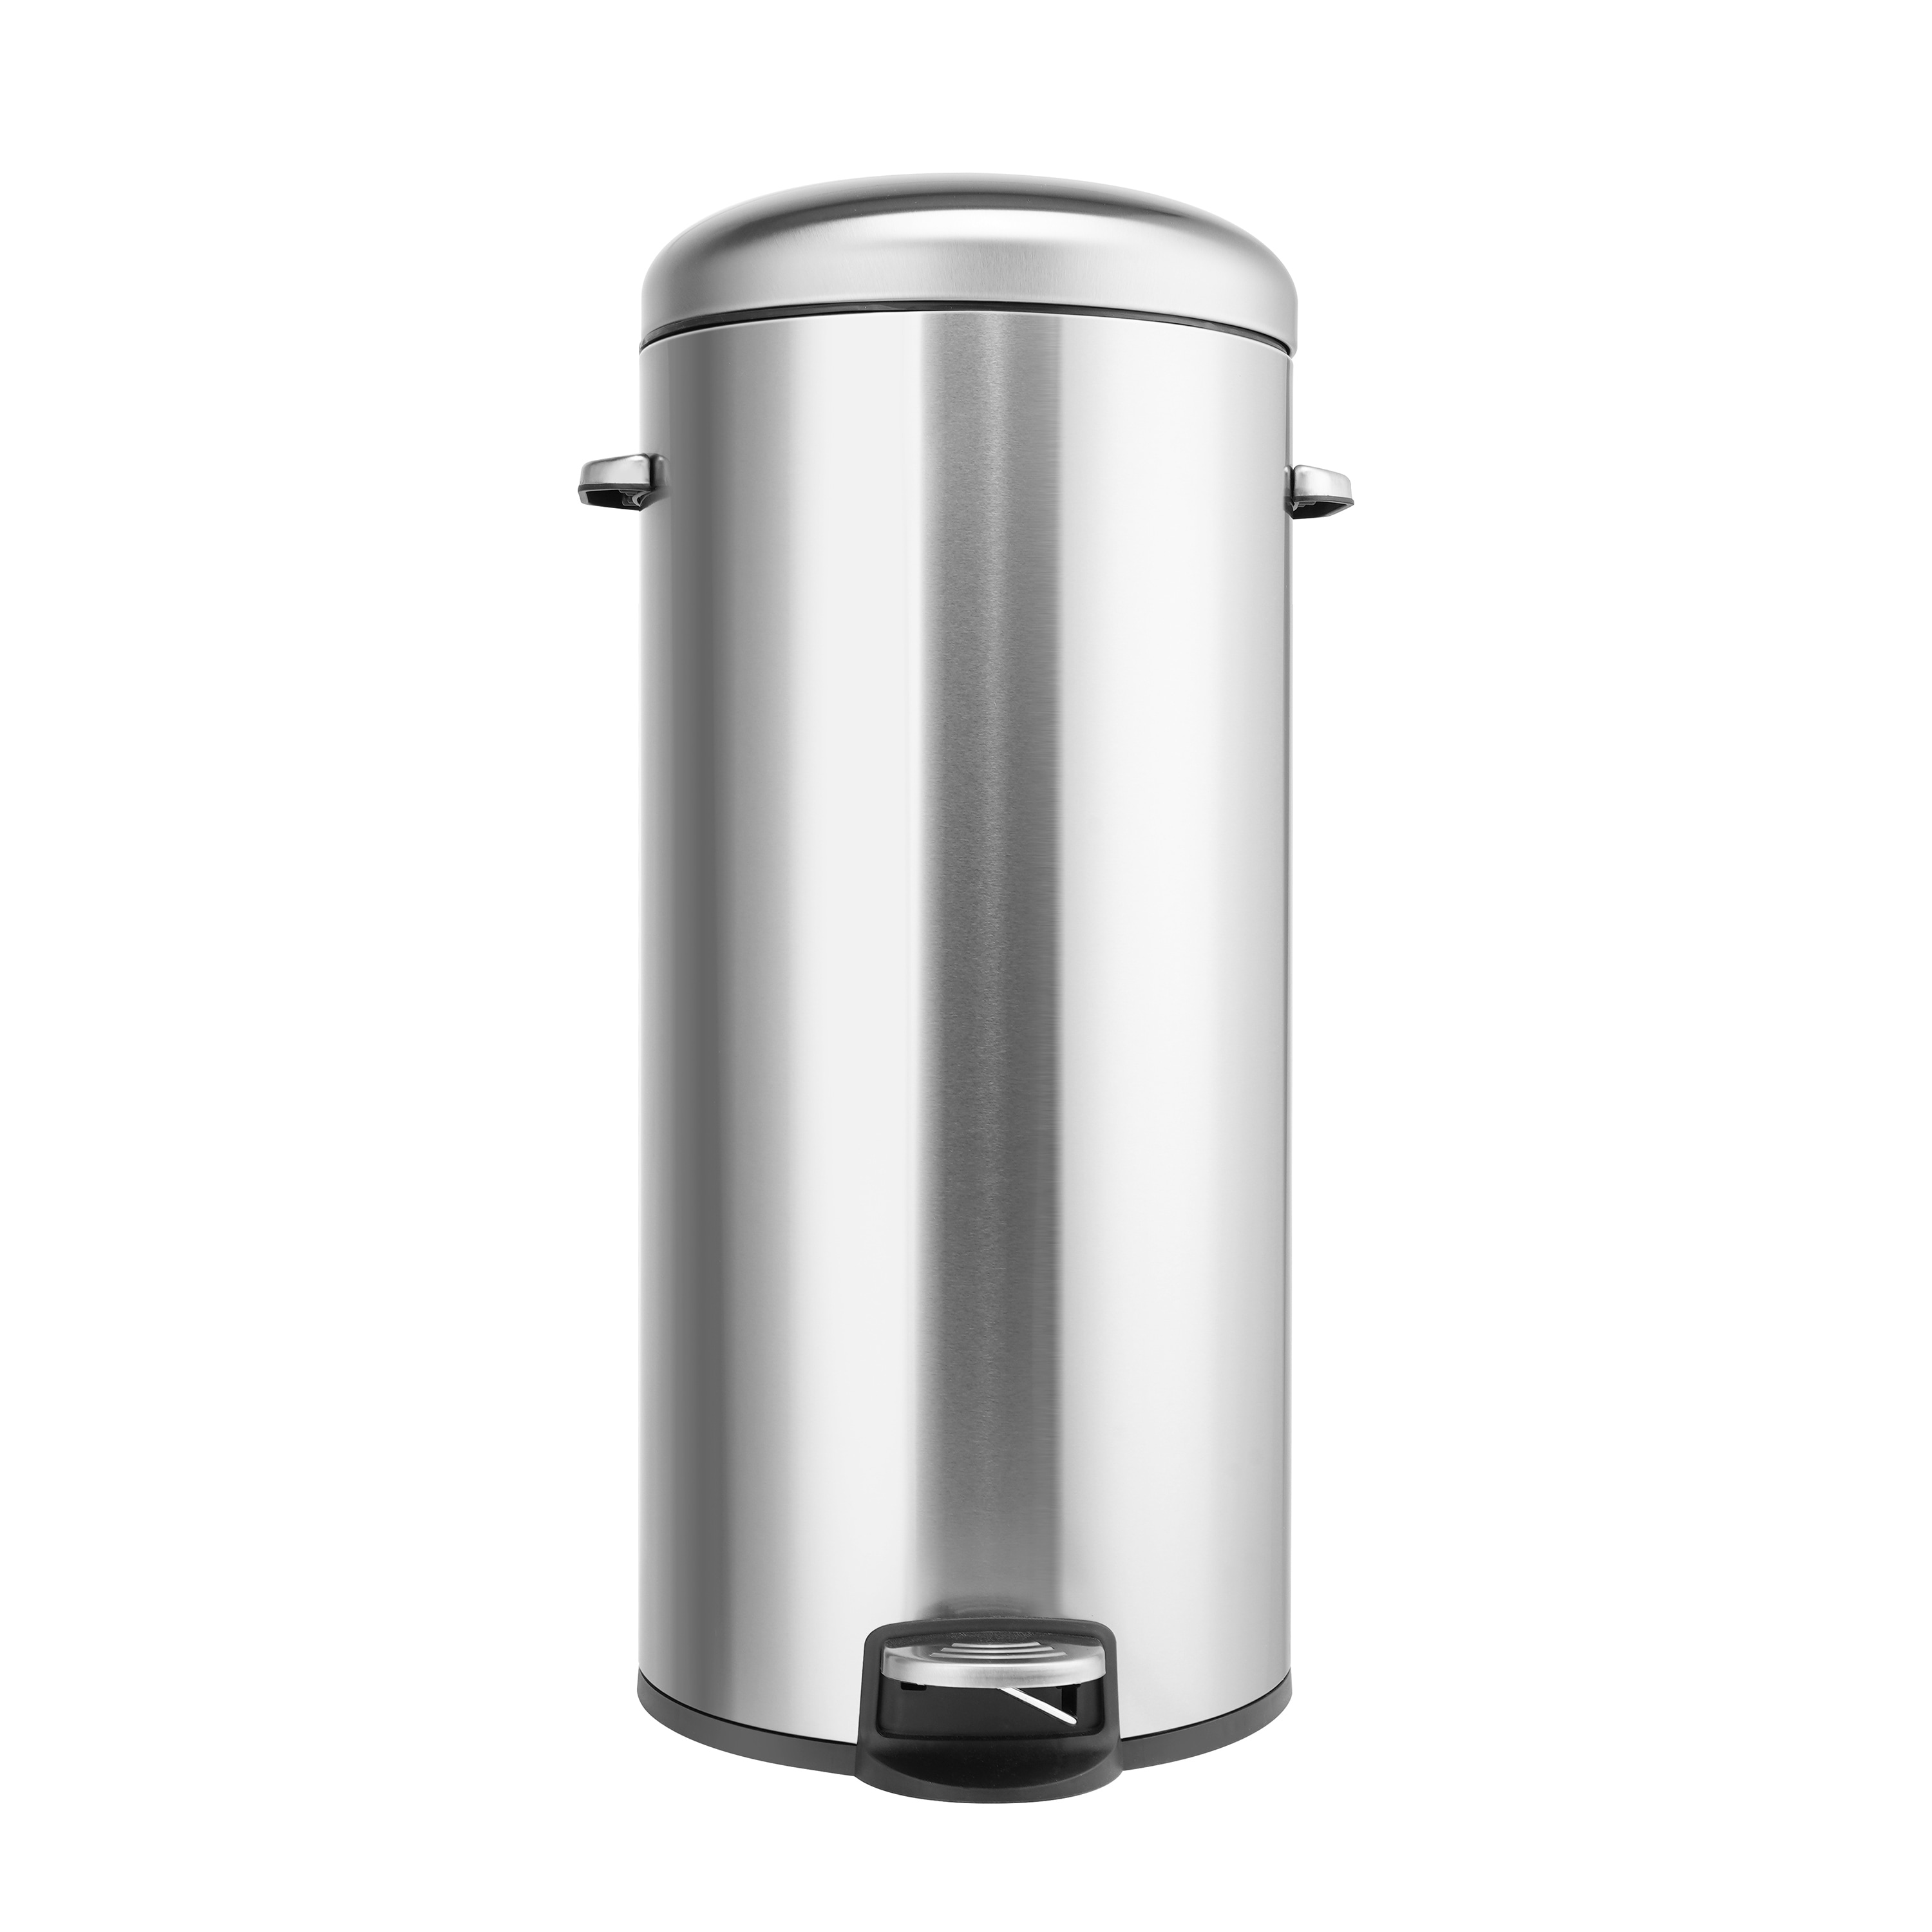 https://ak1.ostkcdn.com/images/products/is/images/direct/15ad97b0d6f800f315bd5b53b7f3bb6e4af7e1fd/Innovaze-8-Gallon-Stainless-Steel-Round-Shape-Step-on-Kitchen-Trash-Can.jpg